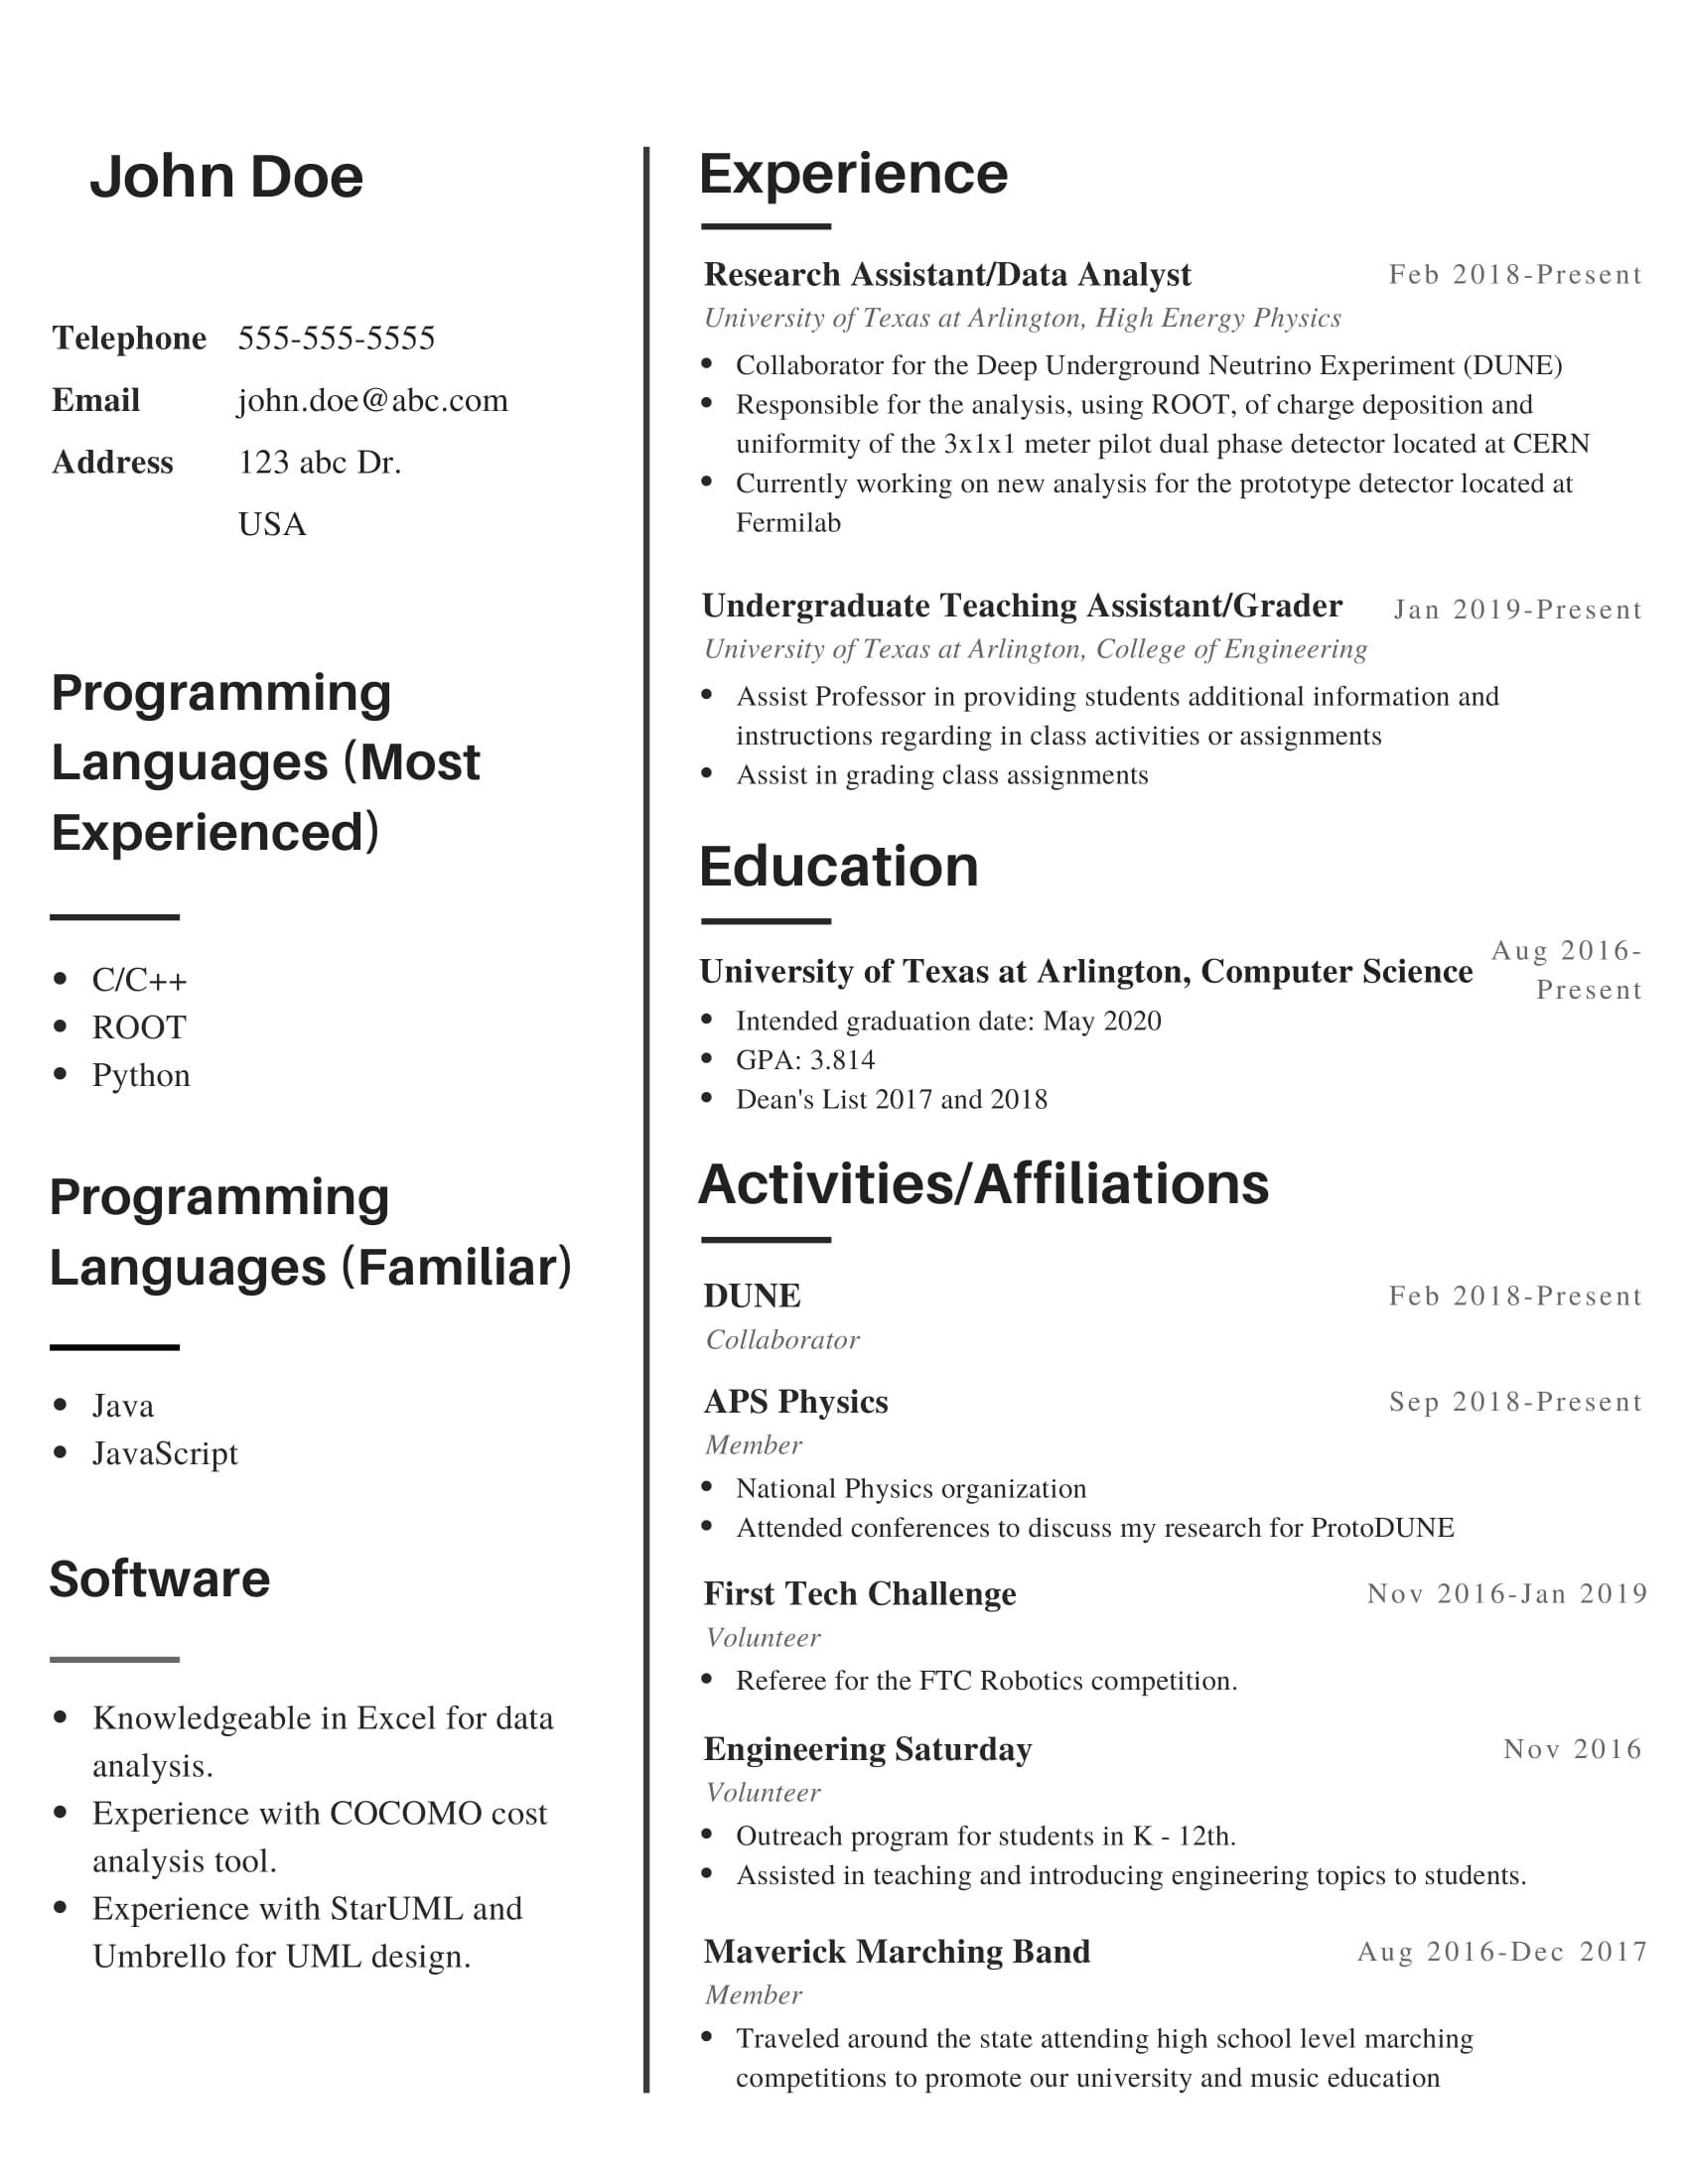 Recent Graduate Resume Computer Science Sample Computer Science Student, Looking for Advice On Resume. : R/resumes